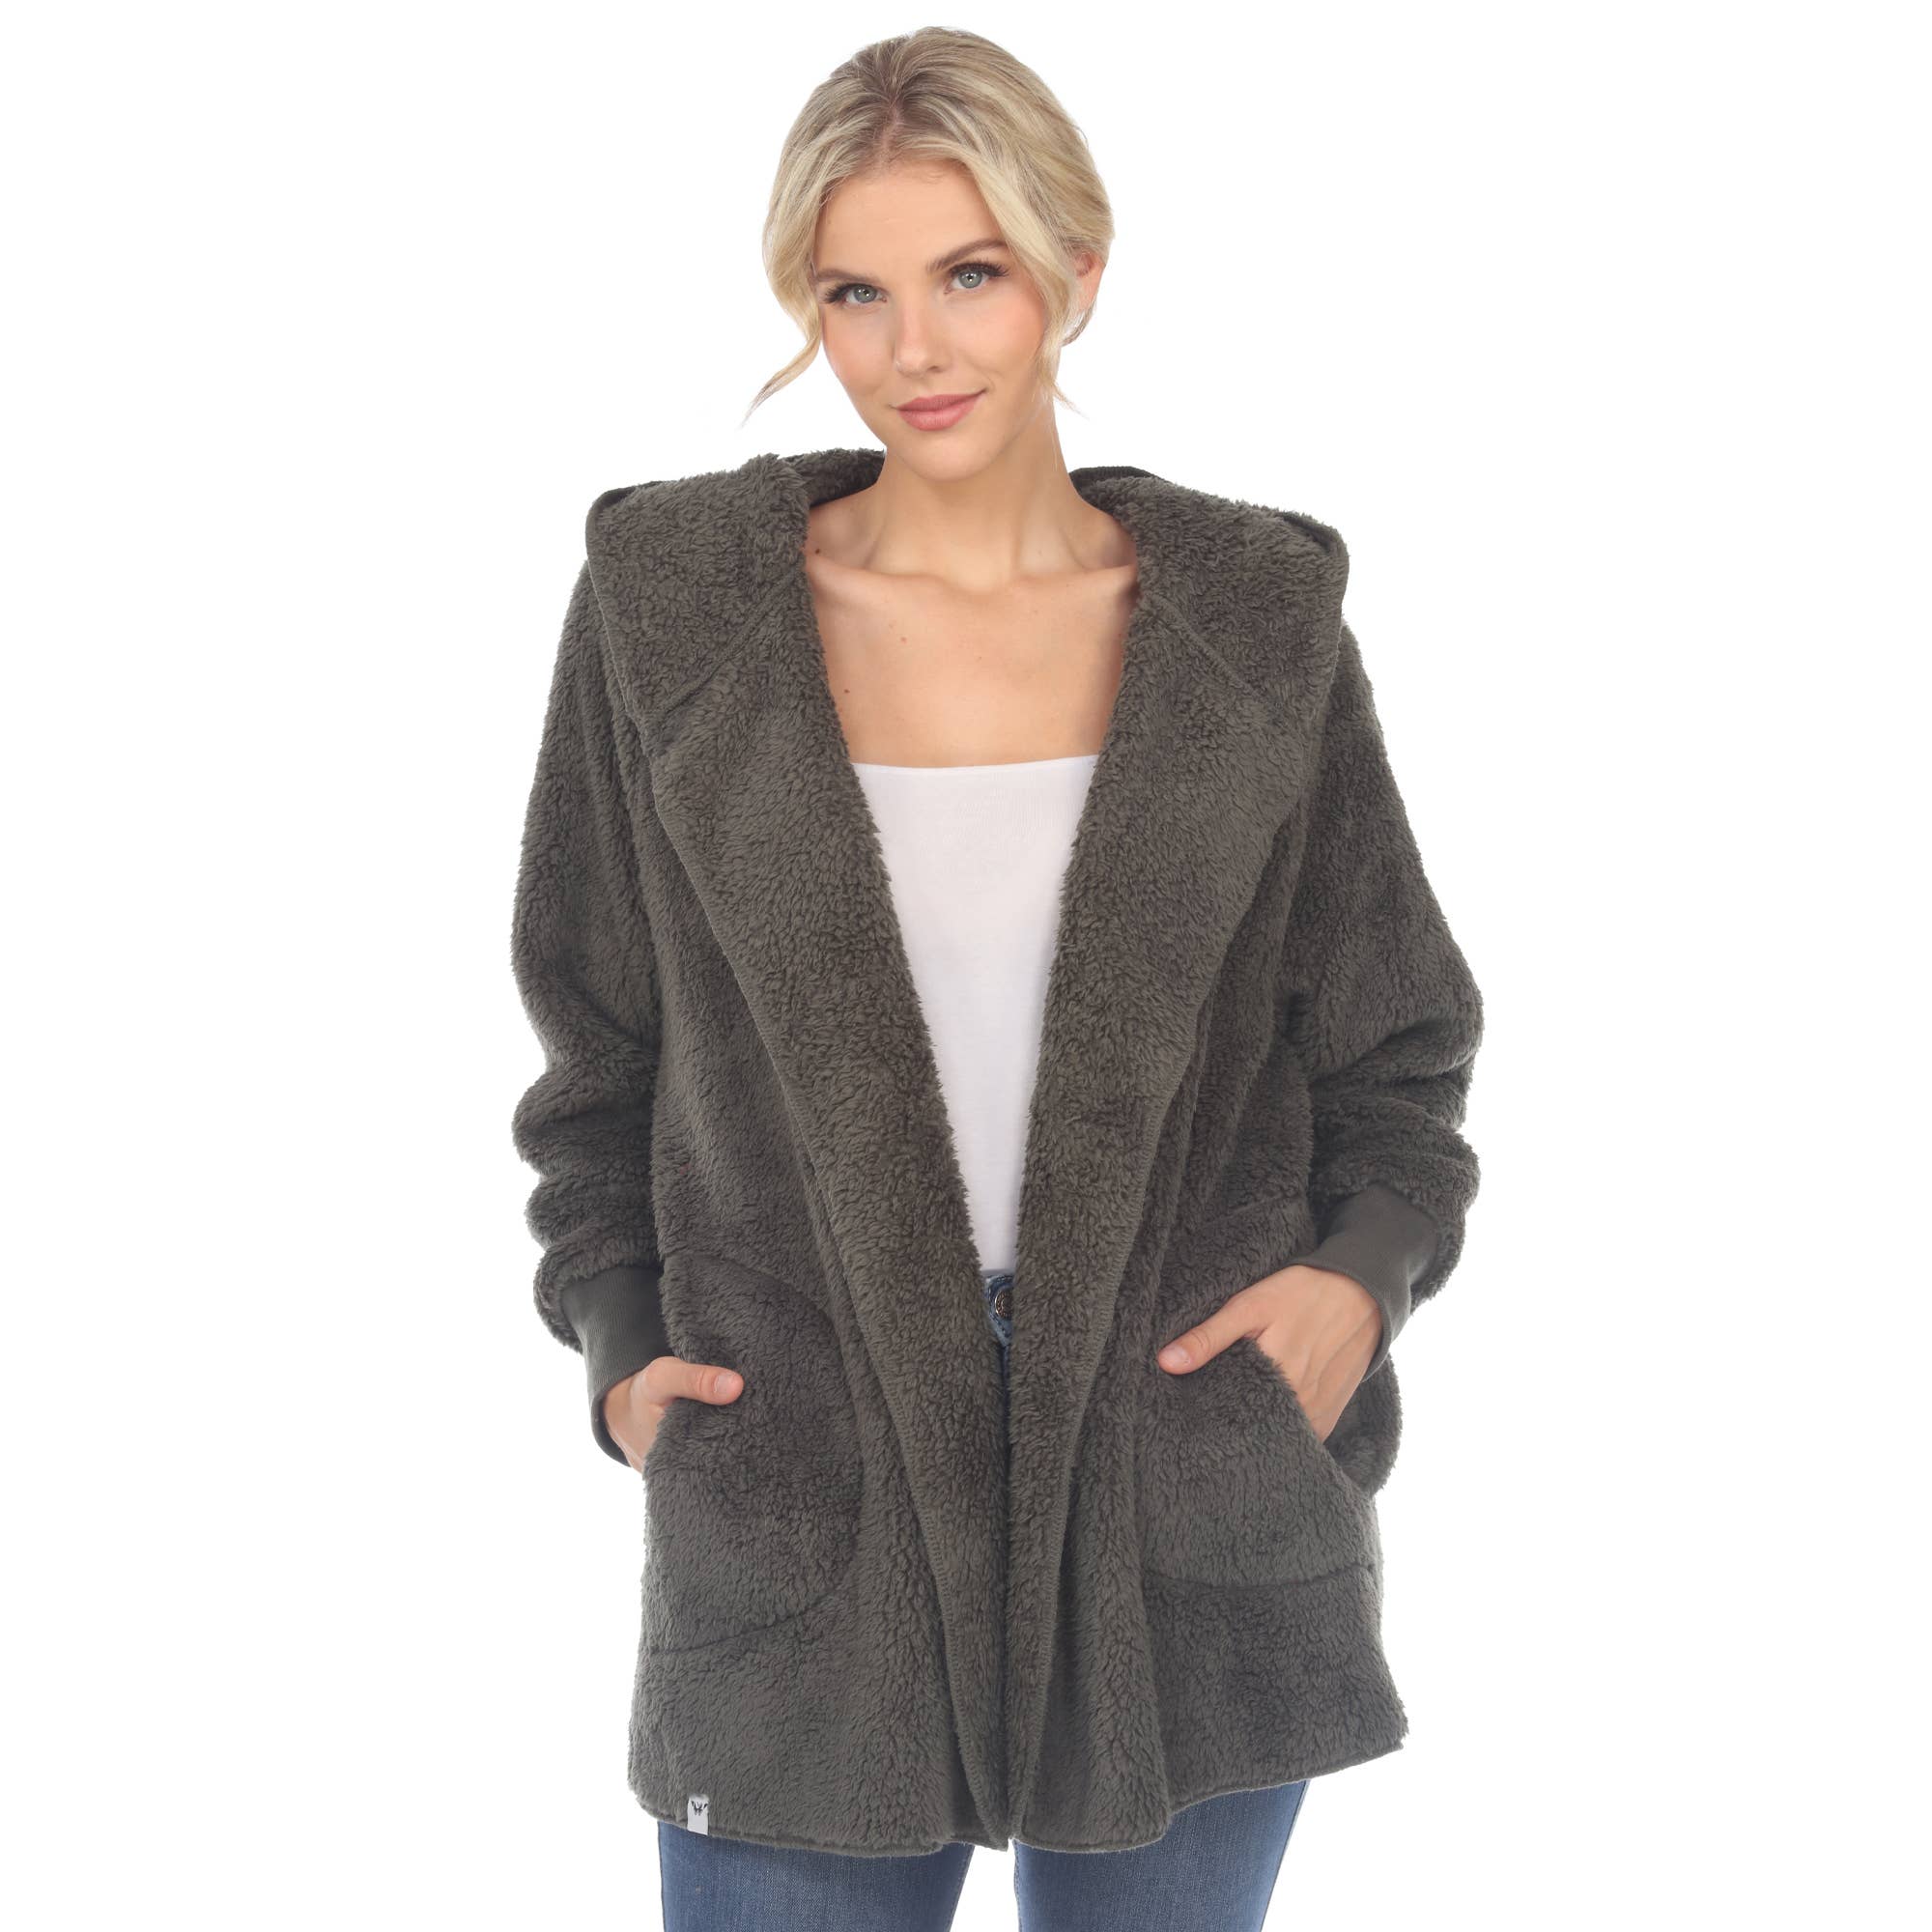 Wholesale Women's Plush Hooded Cardigan with Pockets for your